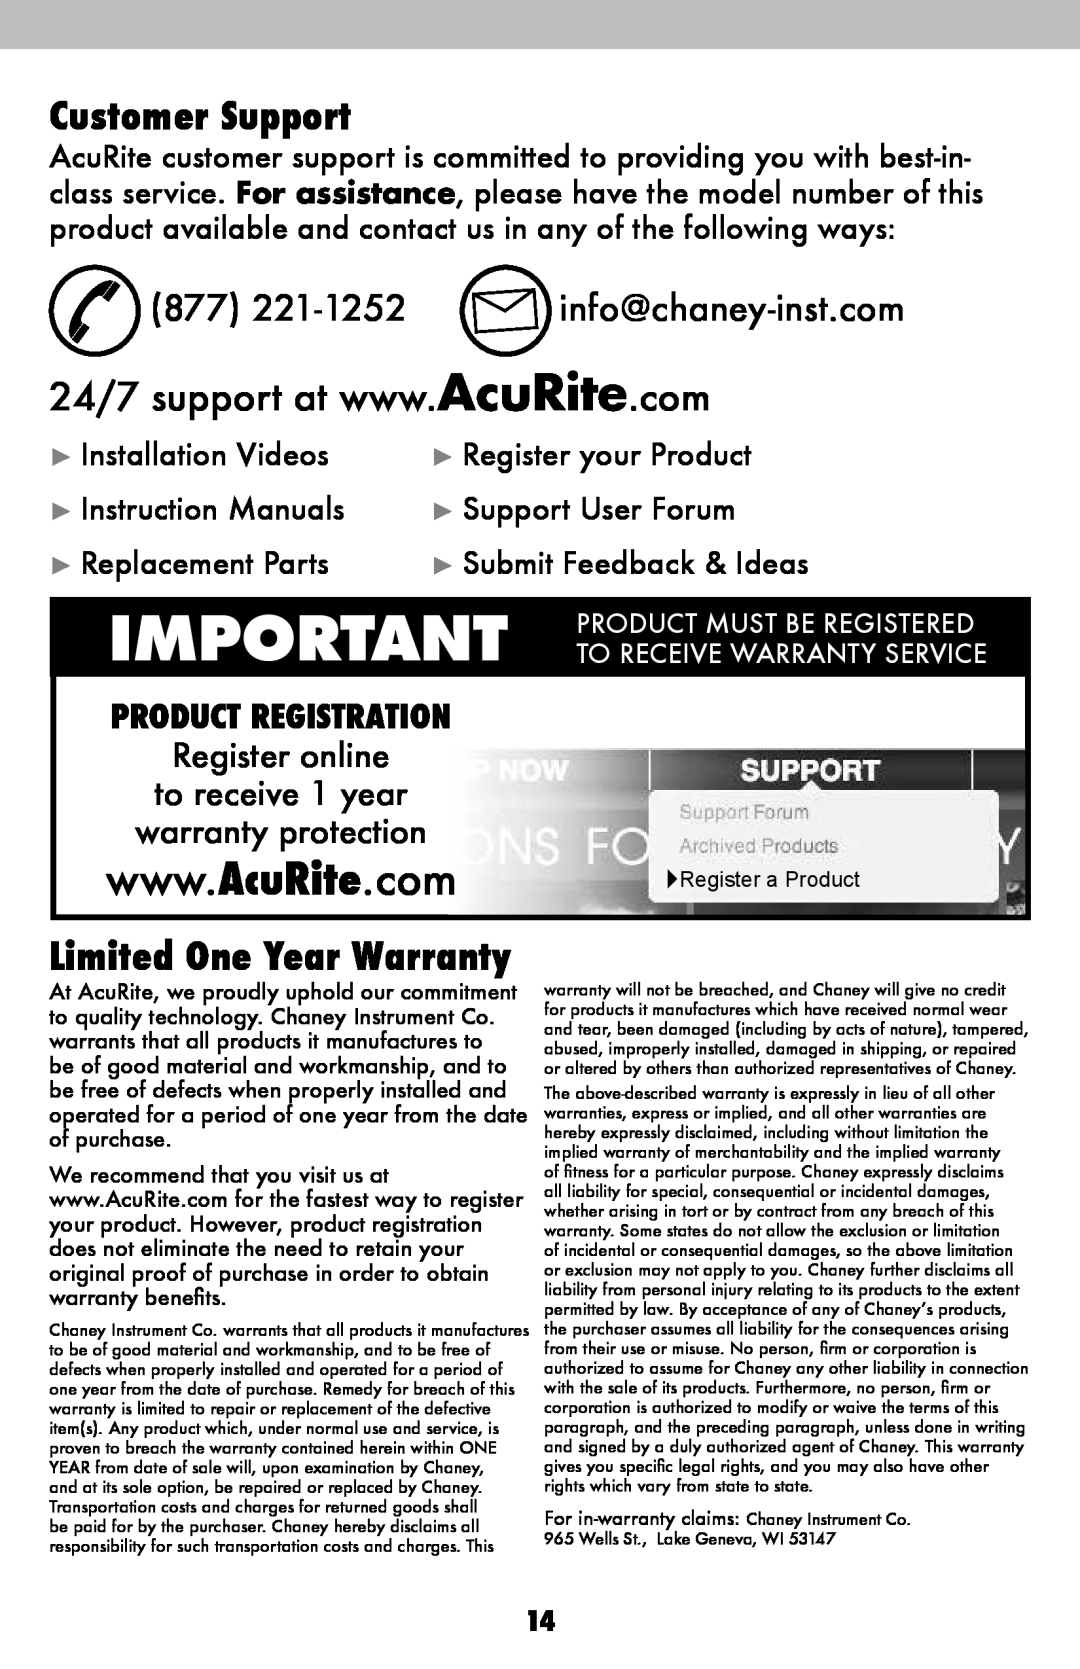 Acu-Rite 02005TBDI Customer Support, Limited One Year Warranty, 877 221-1252 info@chaney-inst.com, Register online 